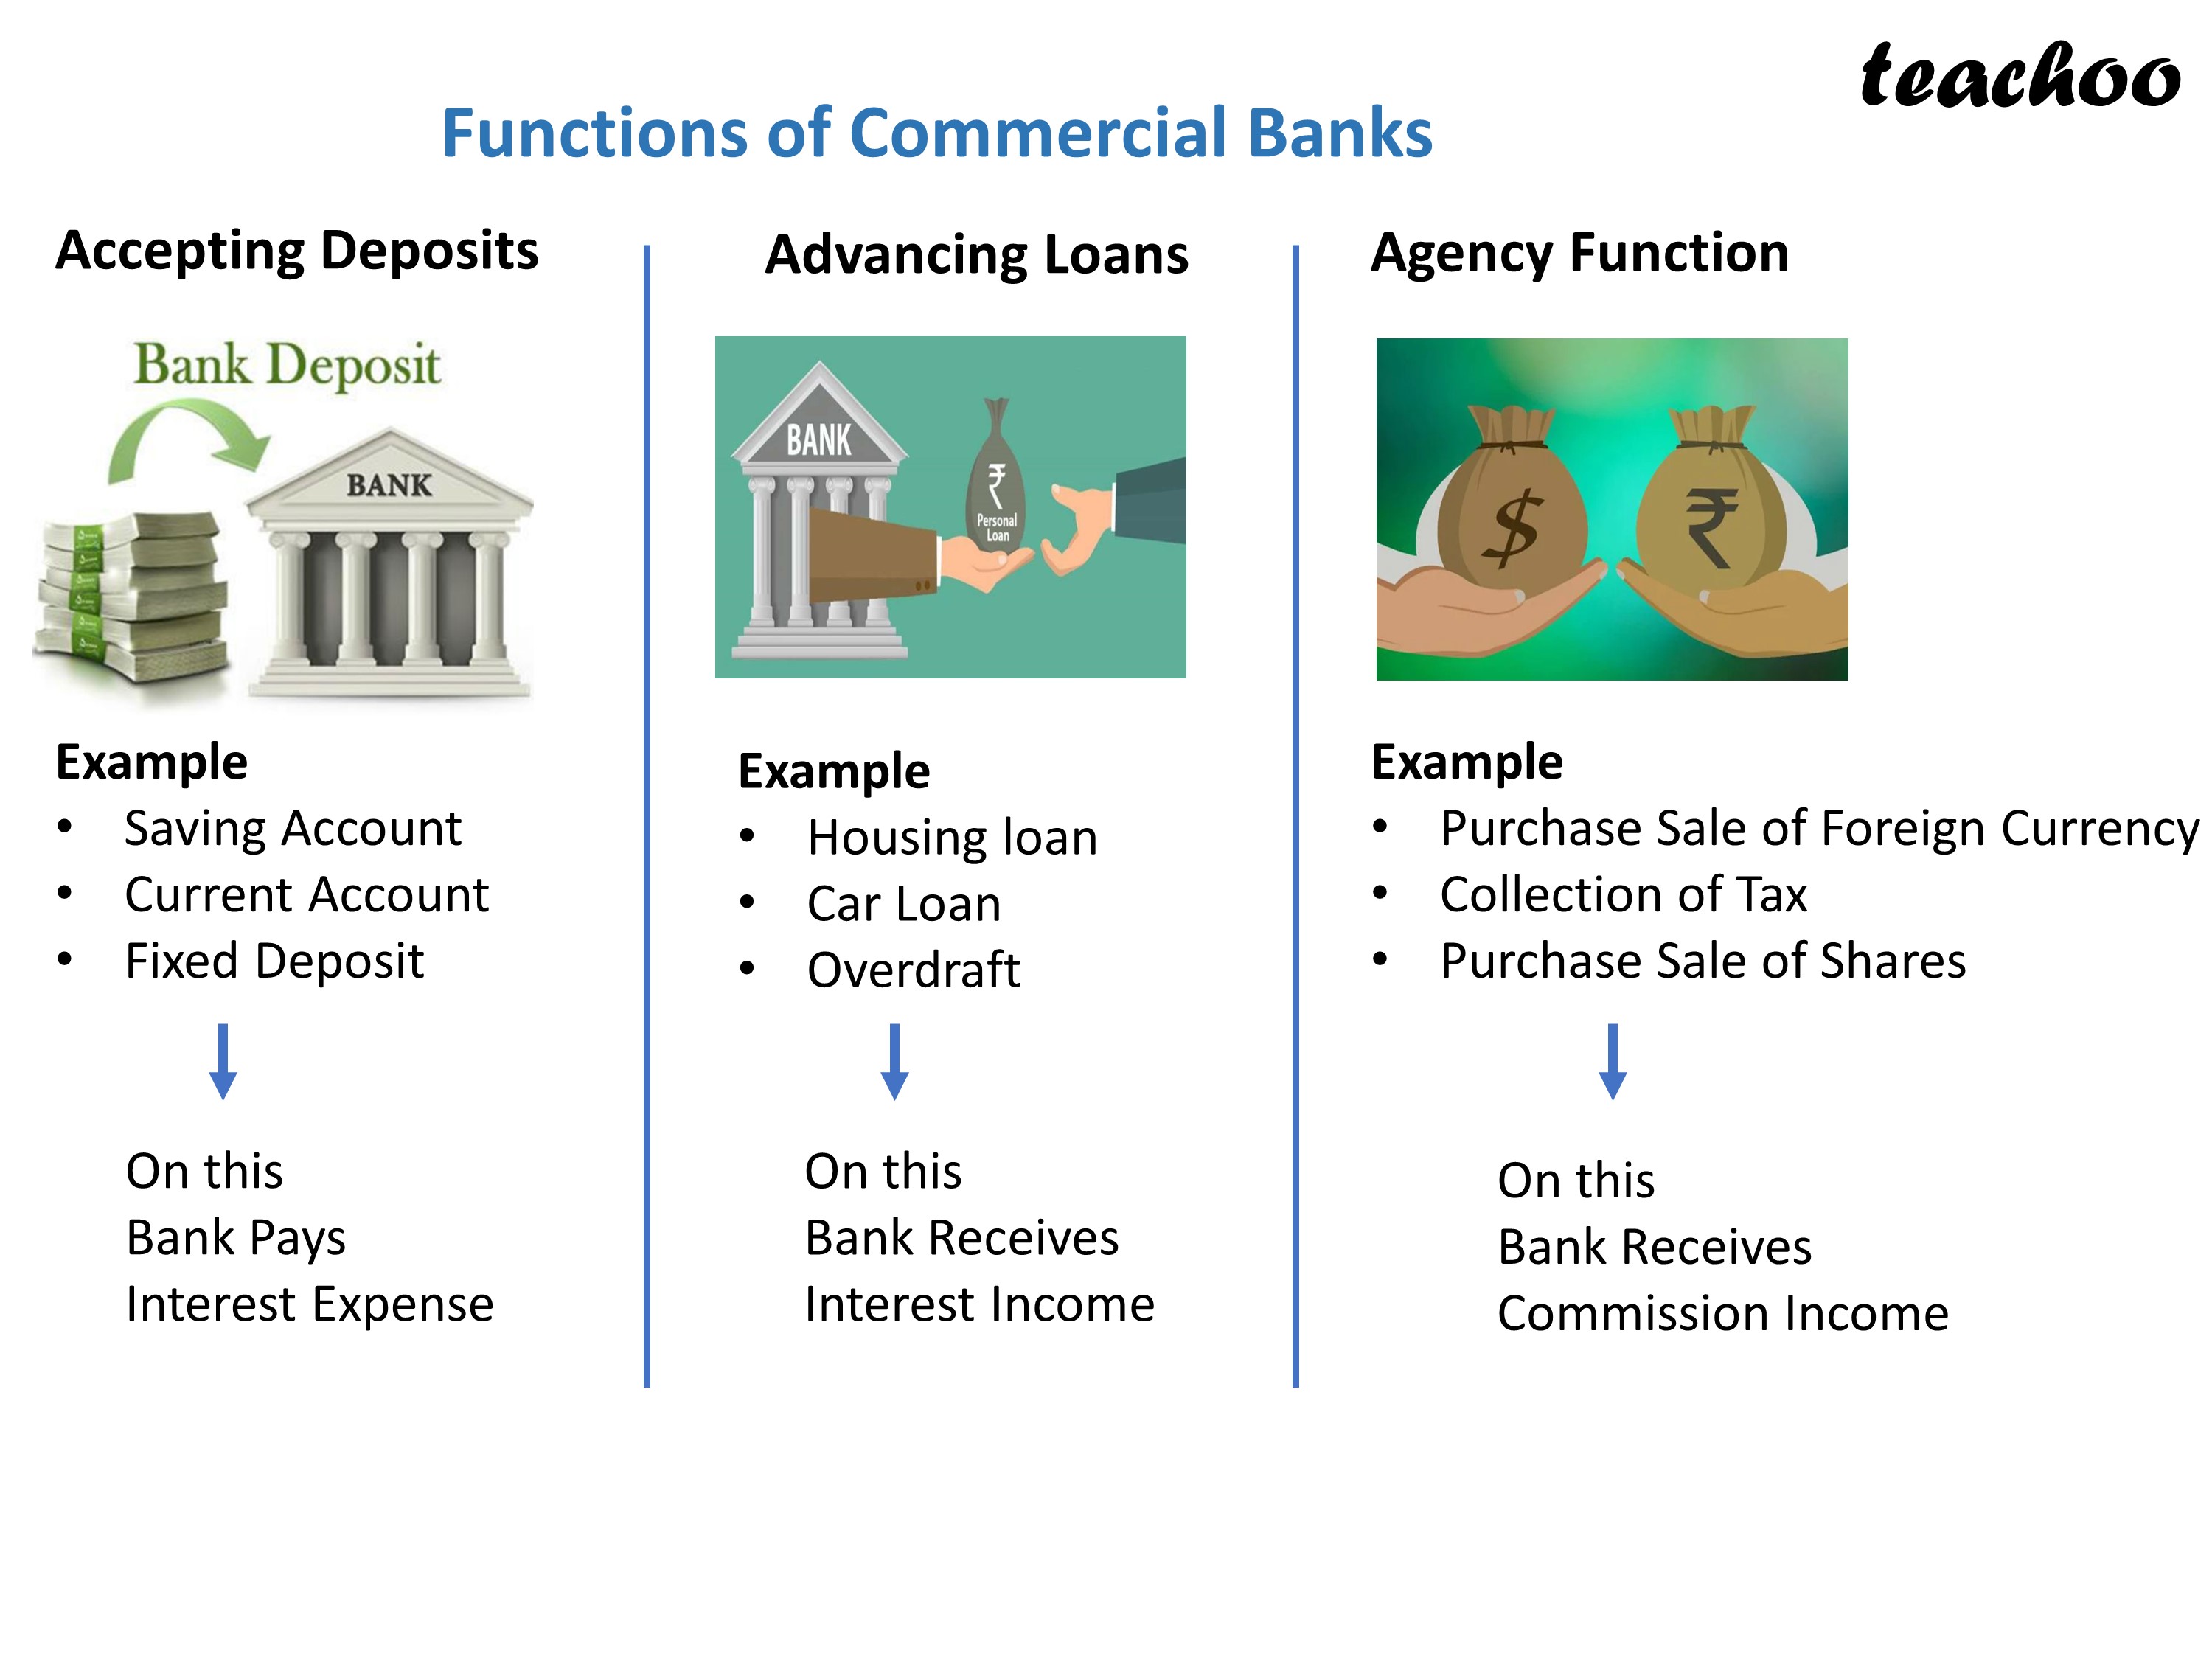 What are the functions of Commercial Bank Class 12 Teachoo